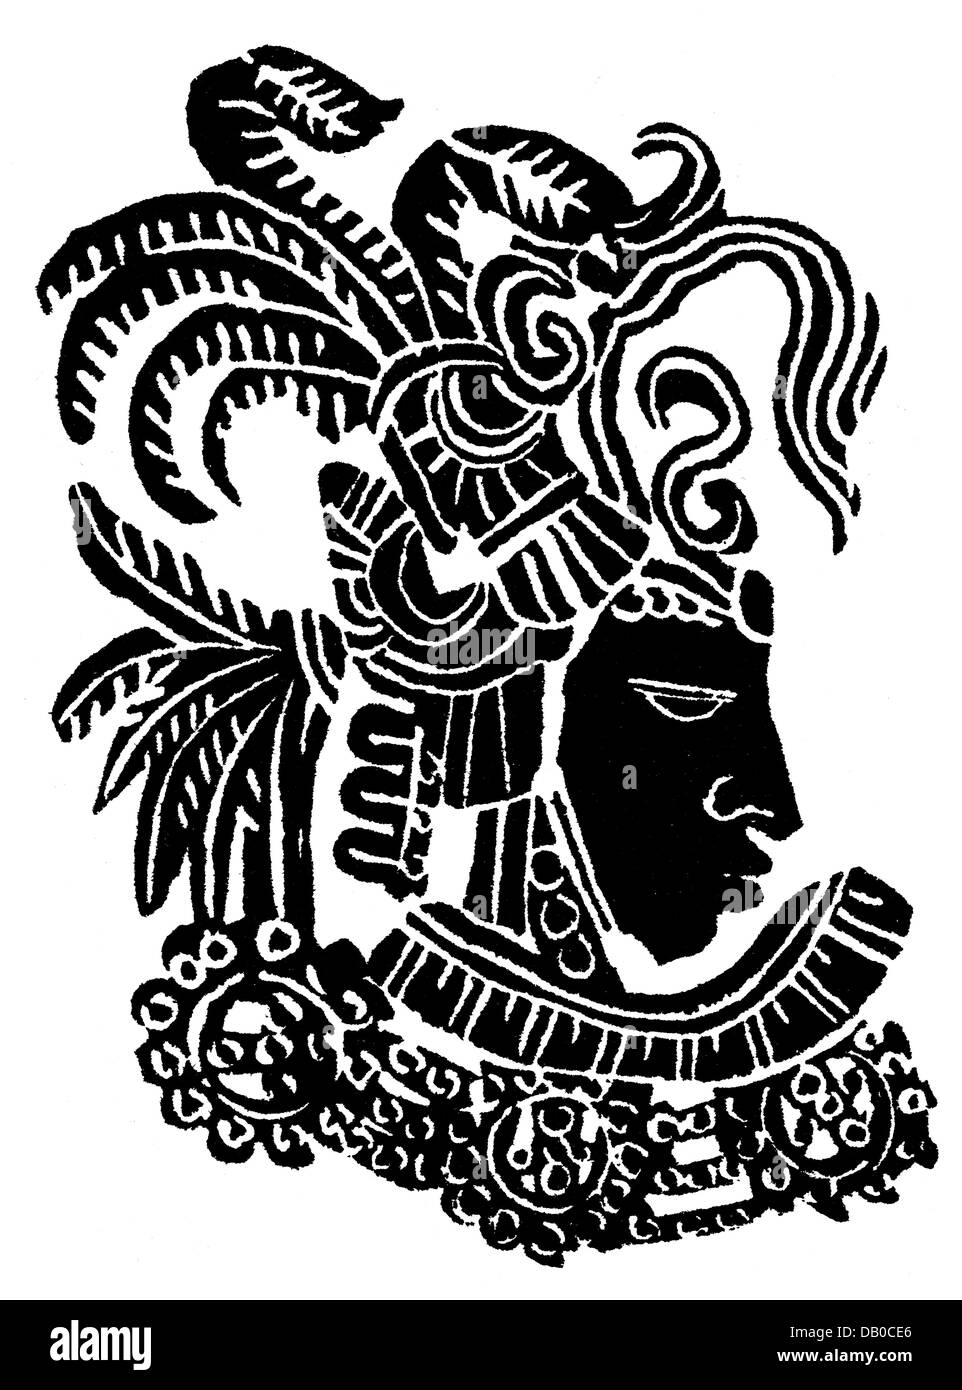 Cuauhtemoc, 1495 - 28.2.1525, ruler of the Aztecs 1520 - 1521, portrait, woodcut after relief, 16th century, Stock Photo